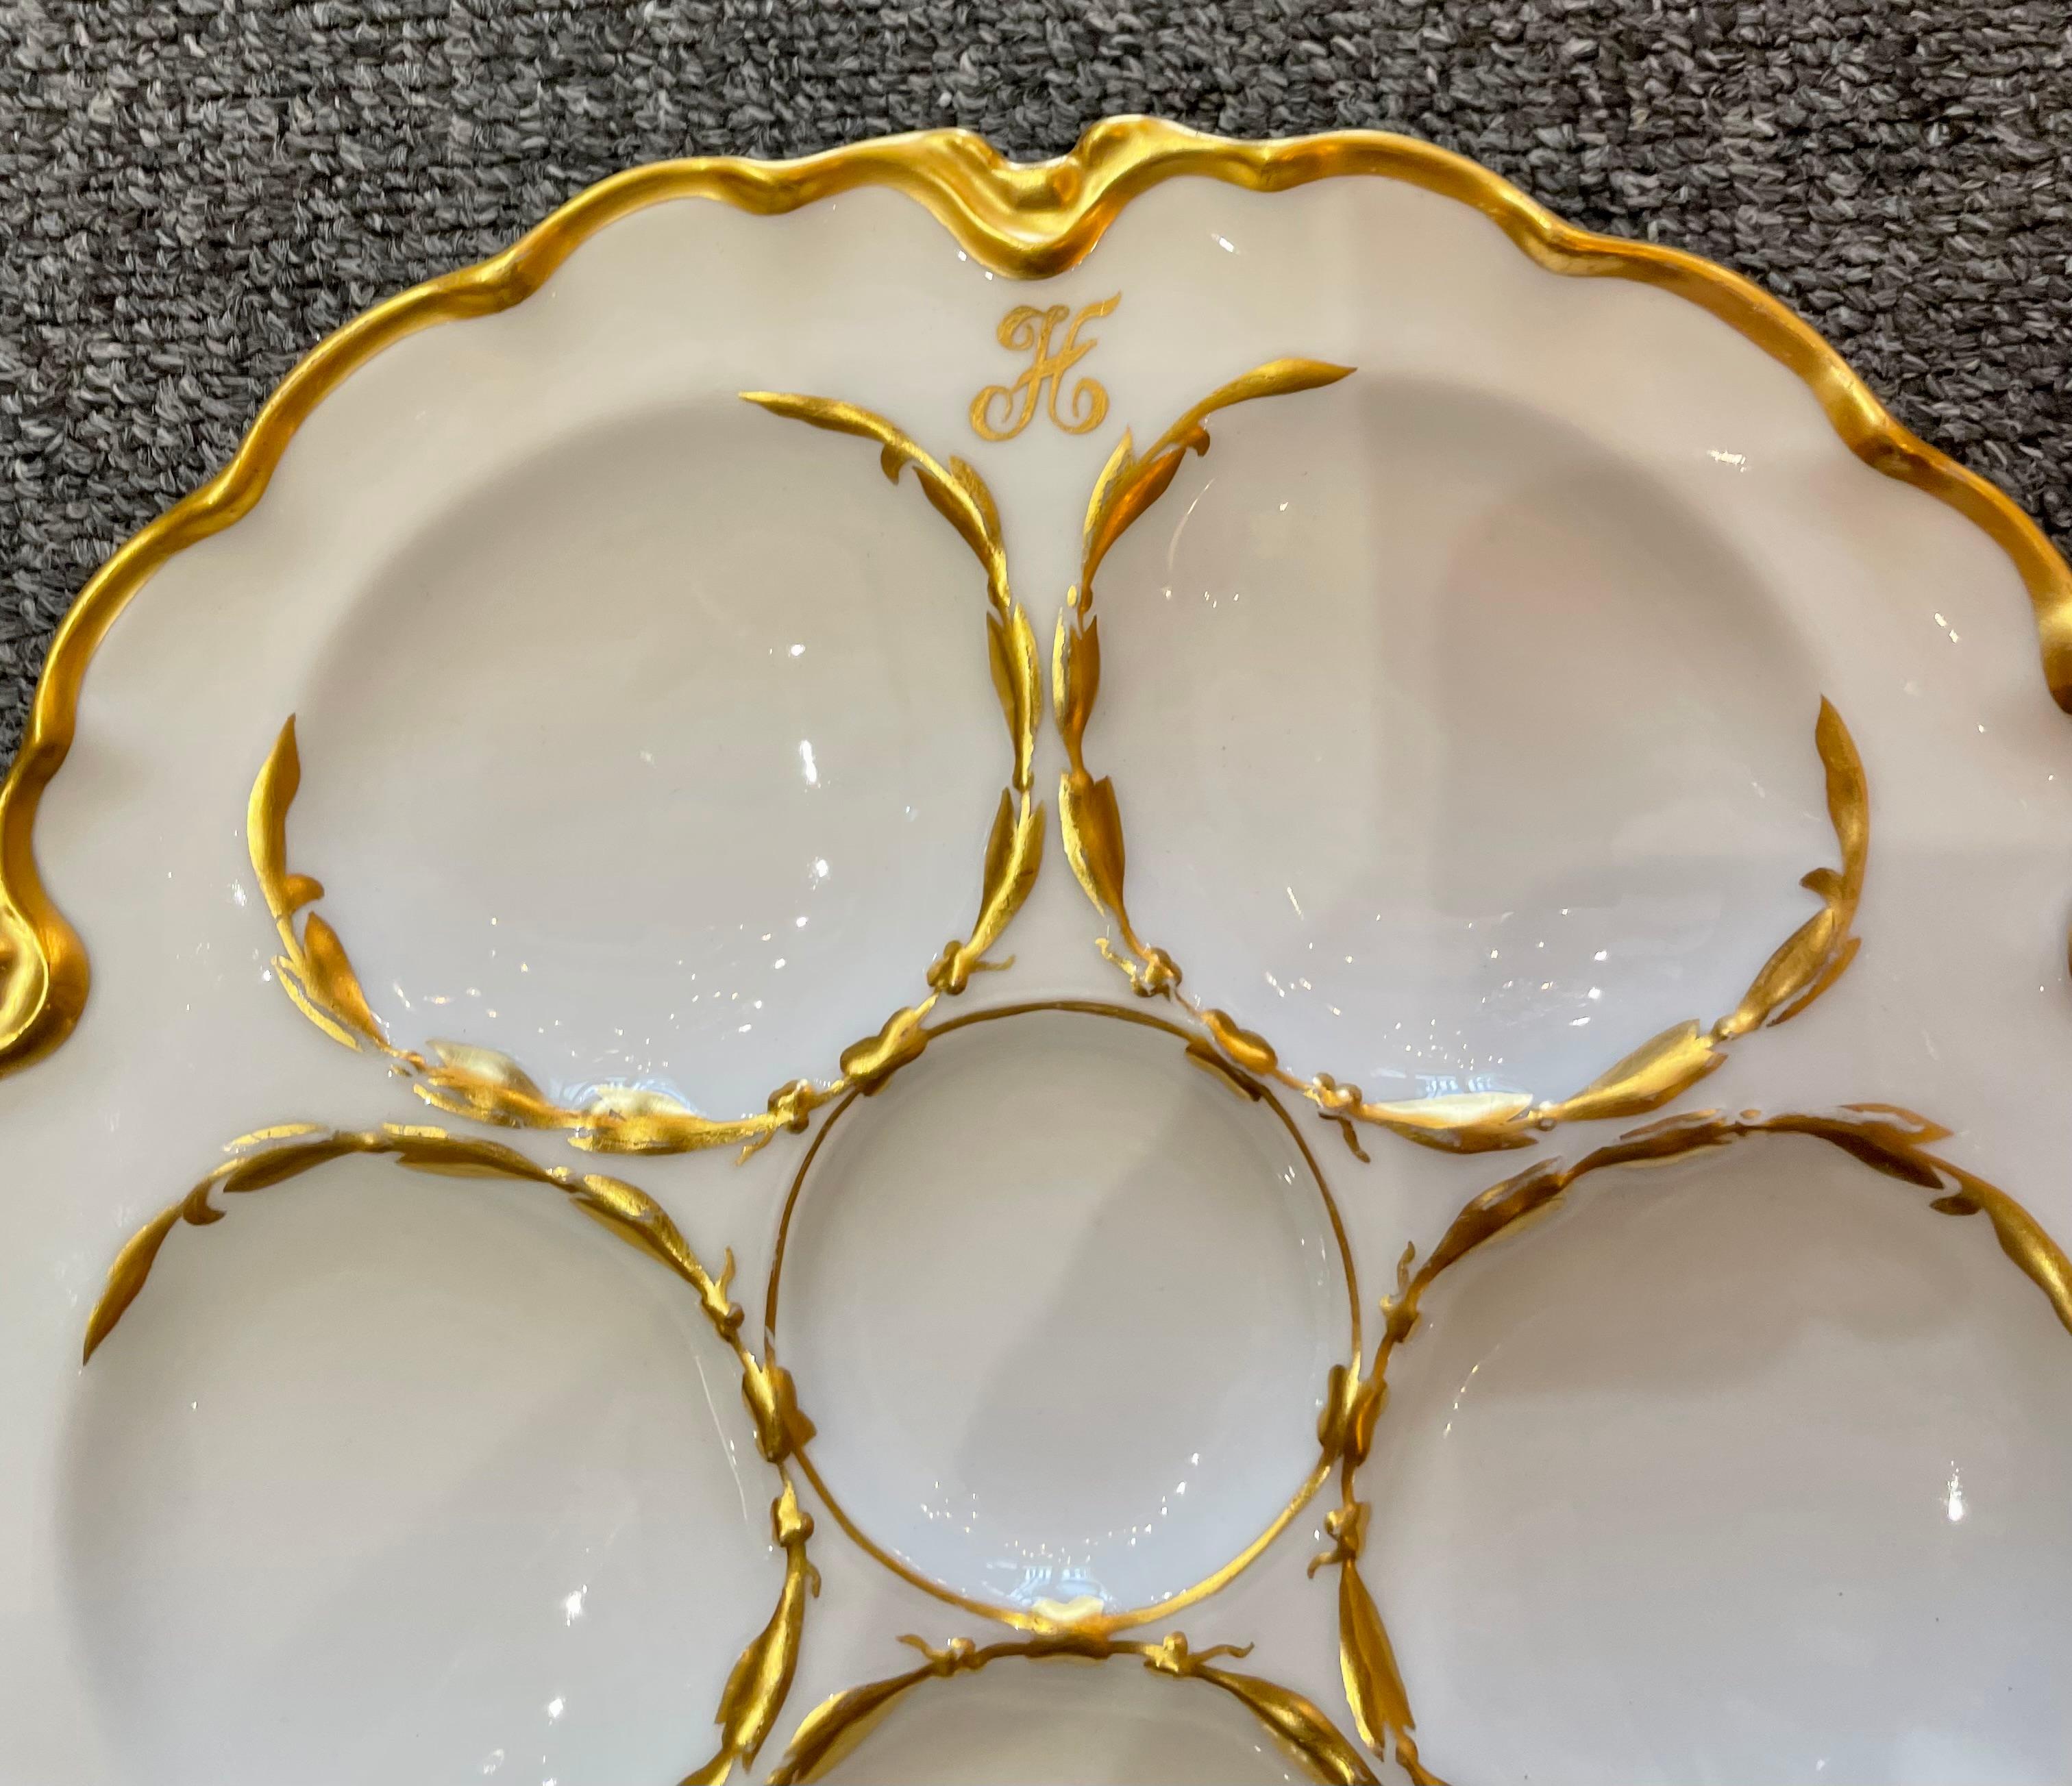 Antique French hand-painted ivory and gold Limoges porcelain oyster plate, signed 